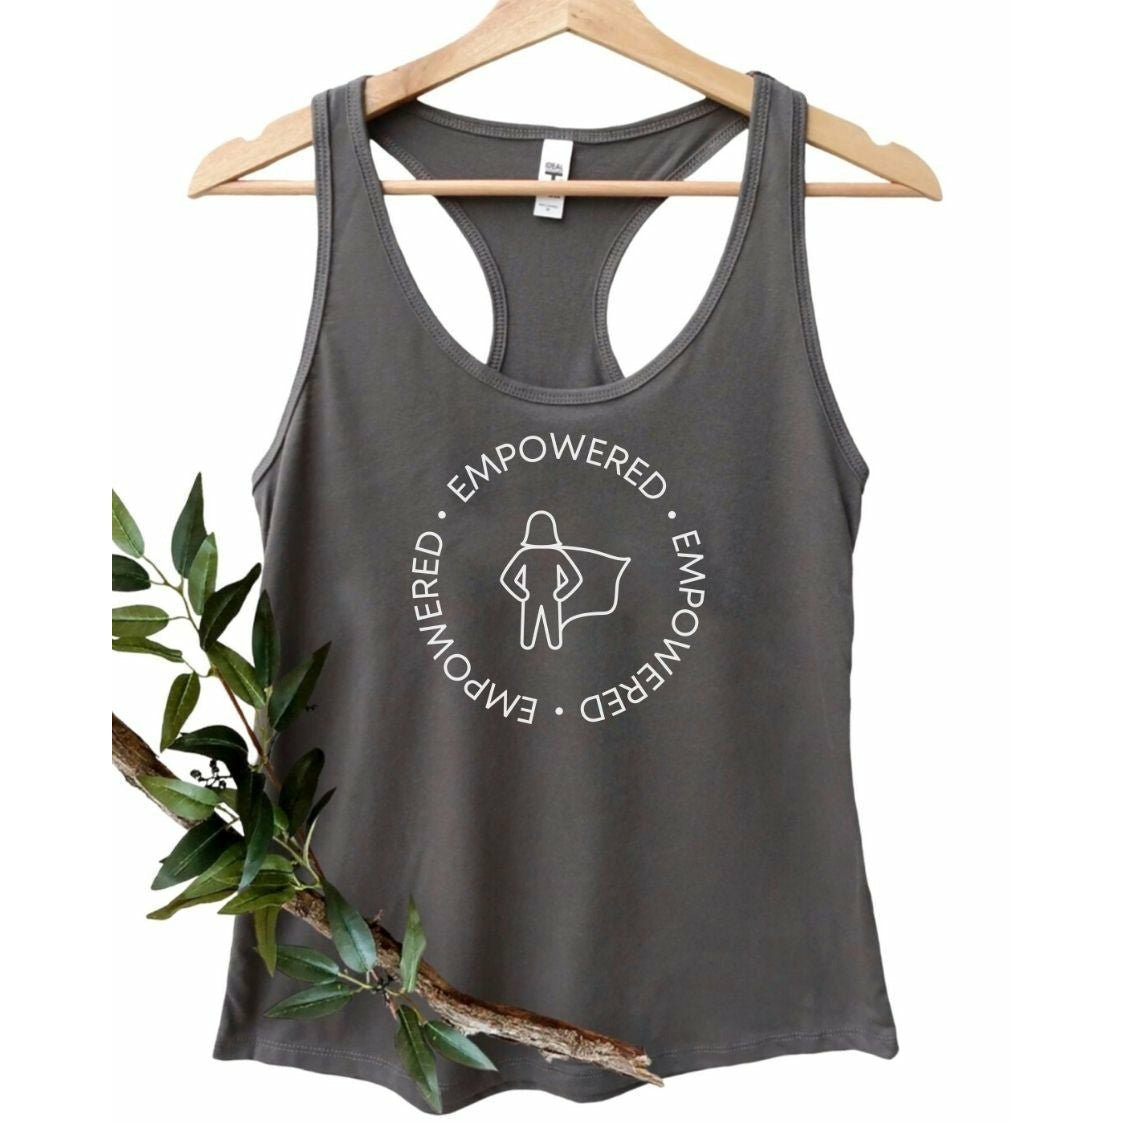 Empowered - Tank Top